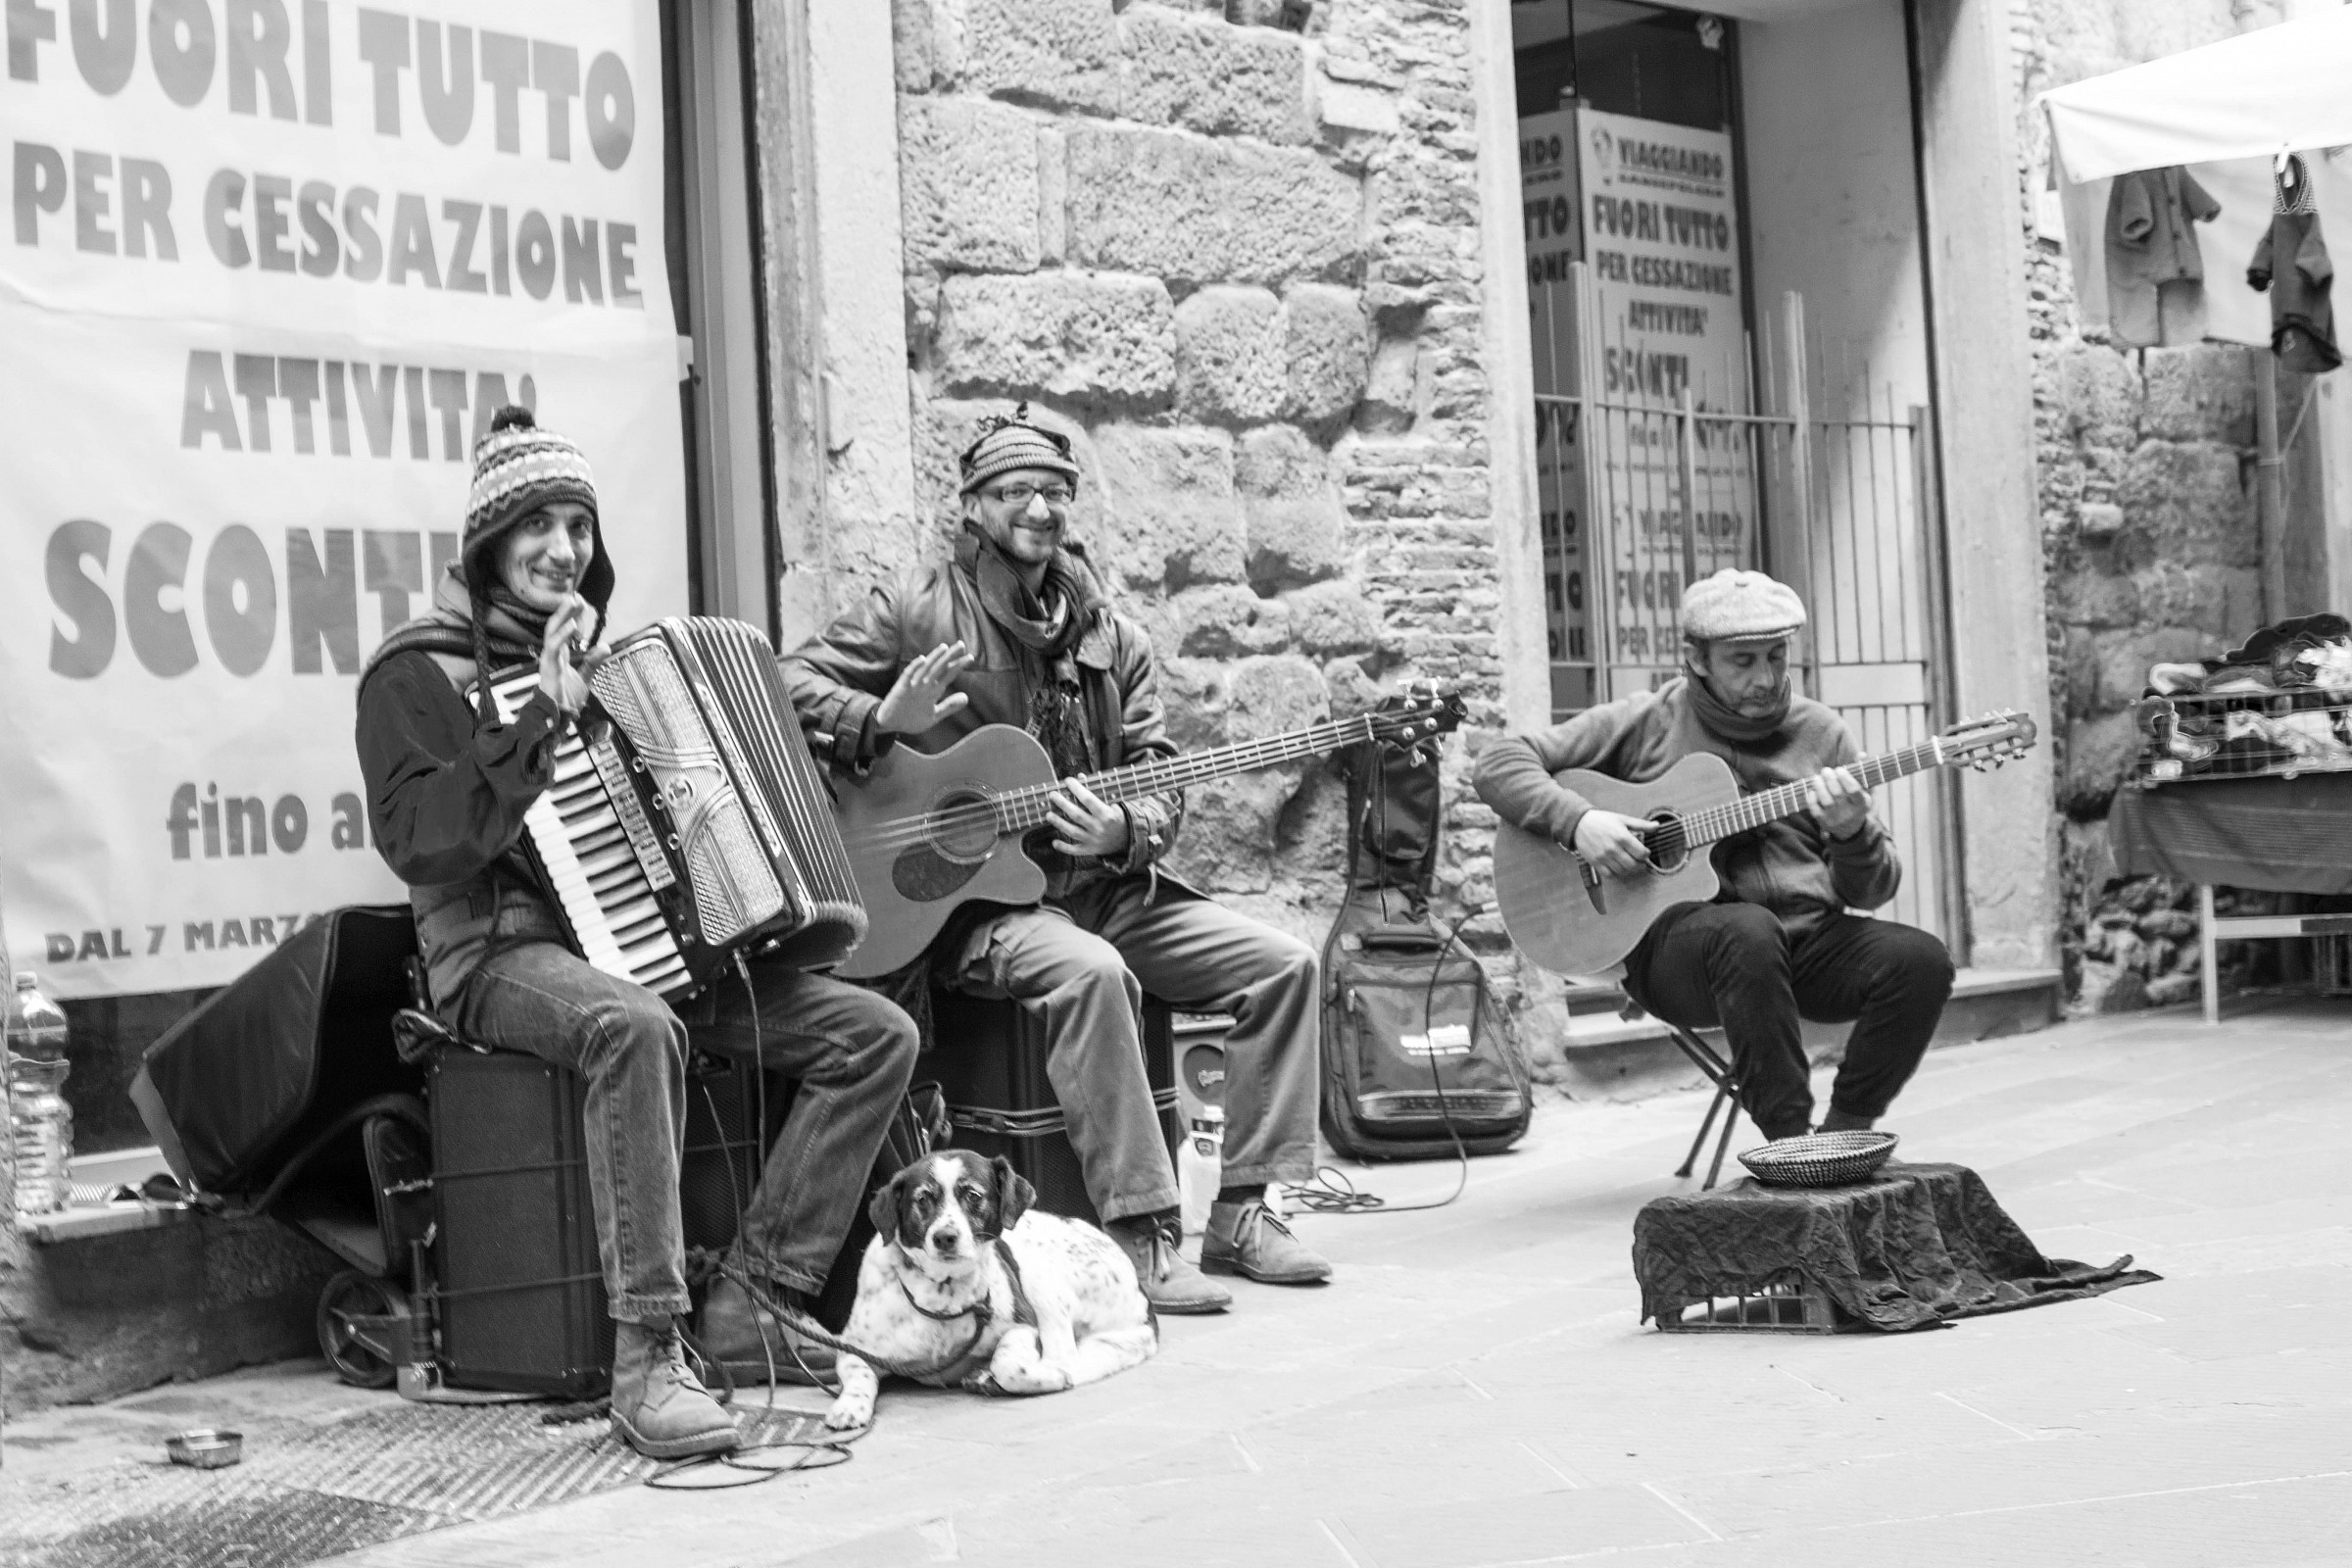 Greetings from street musicians...